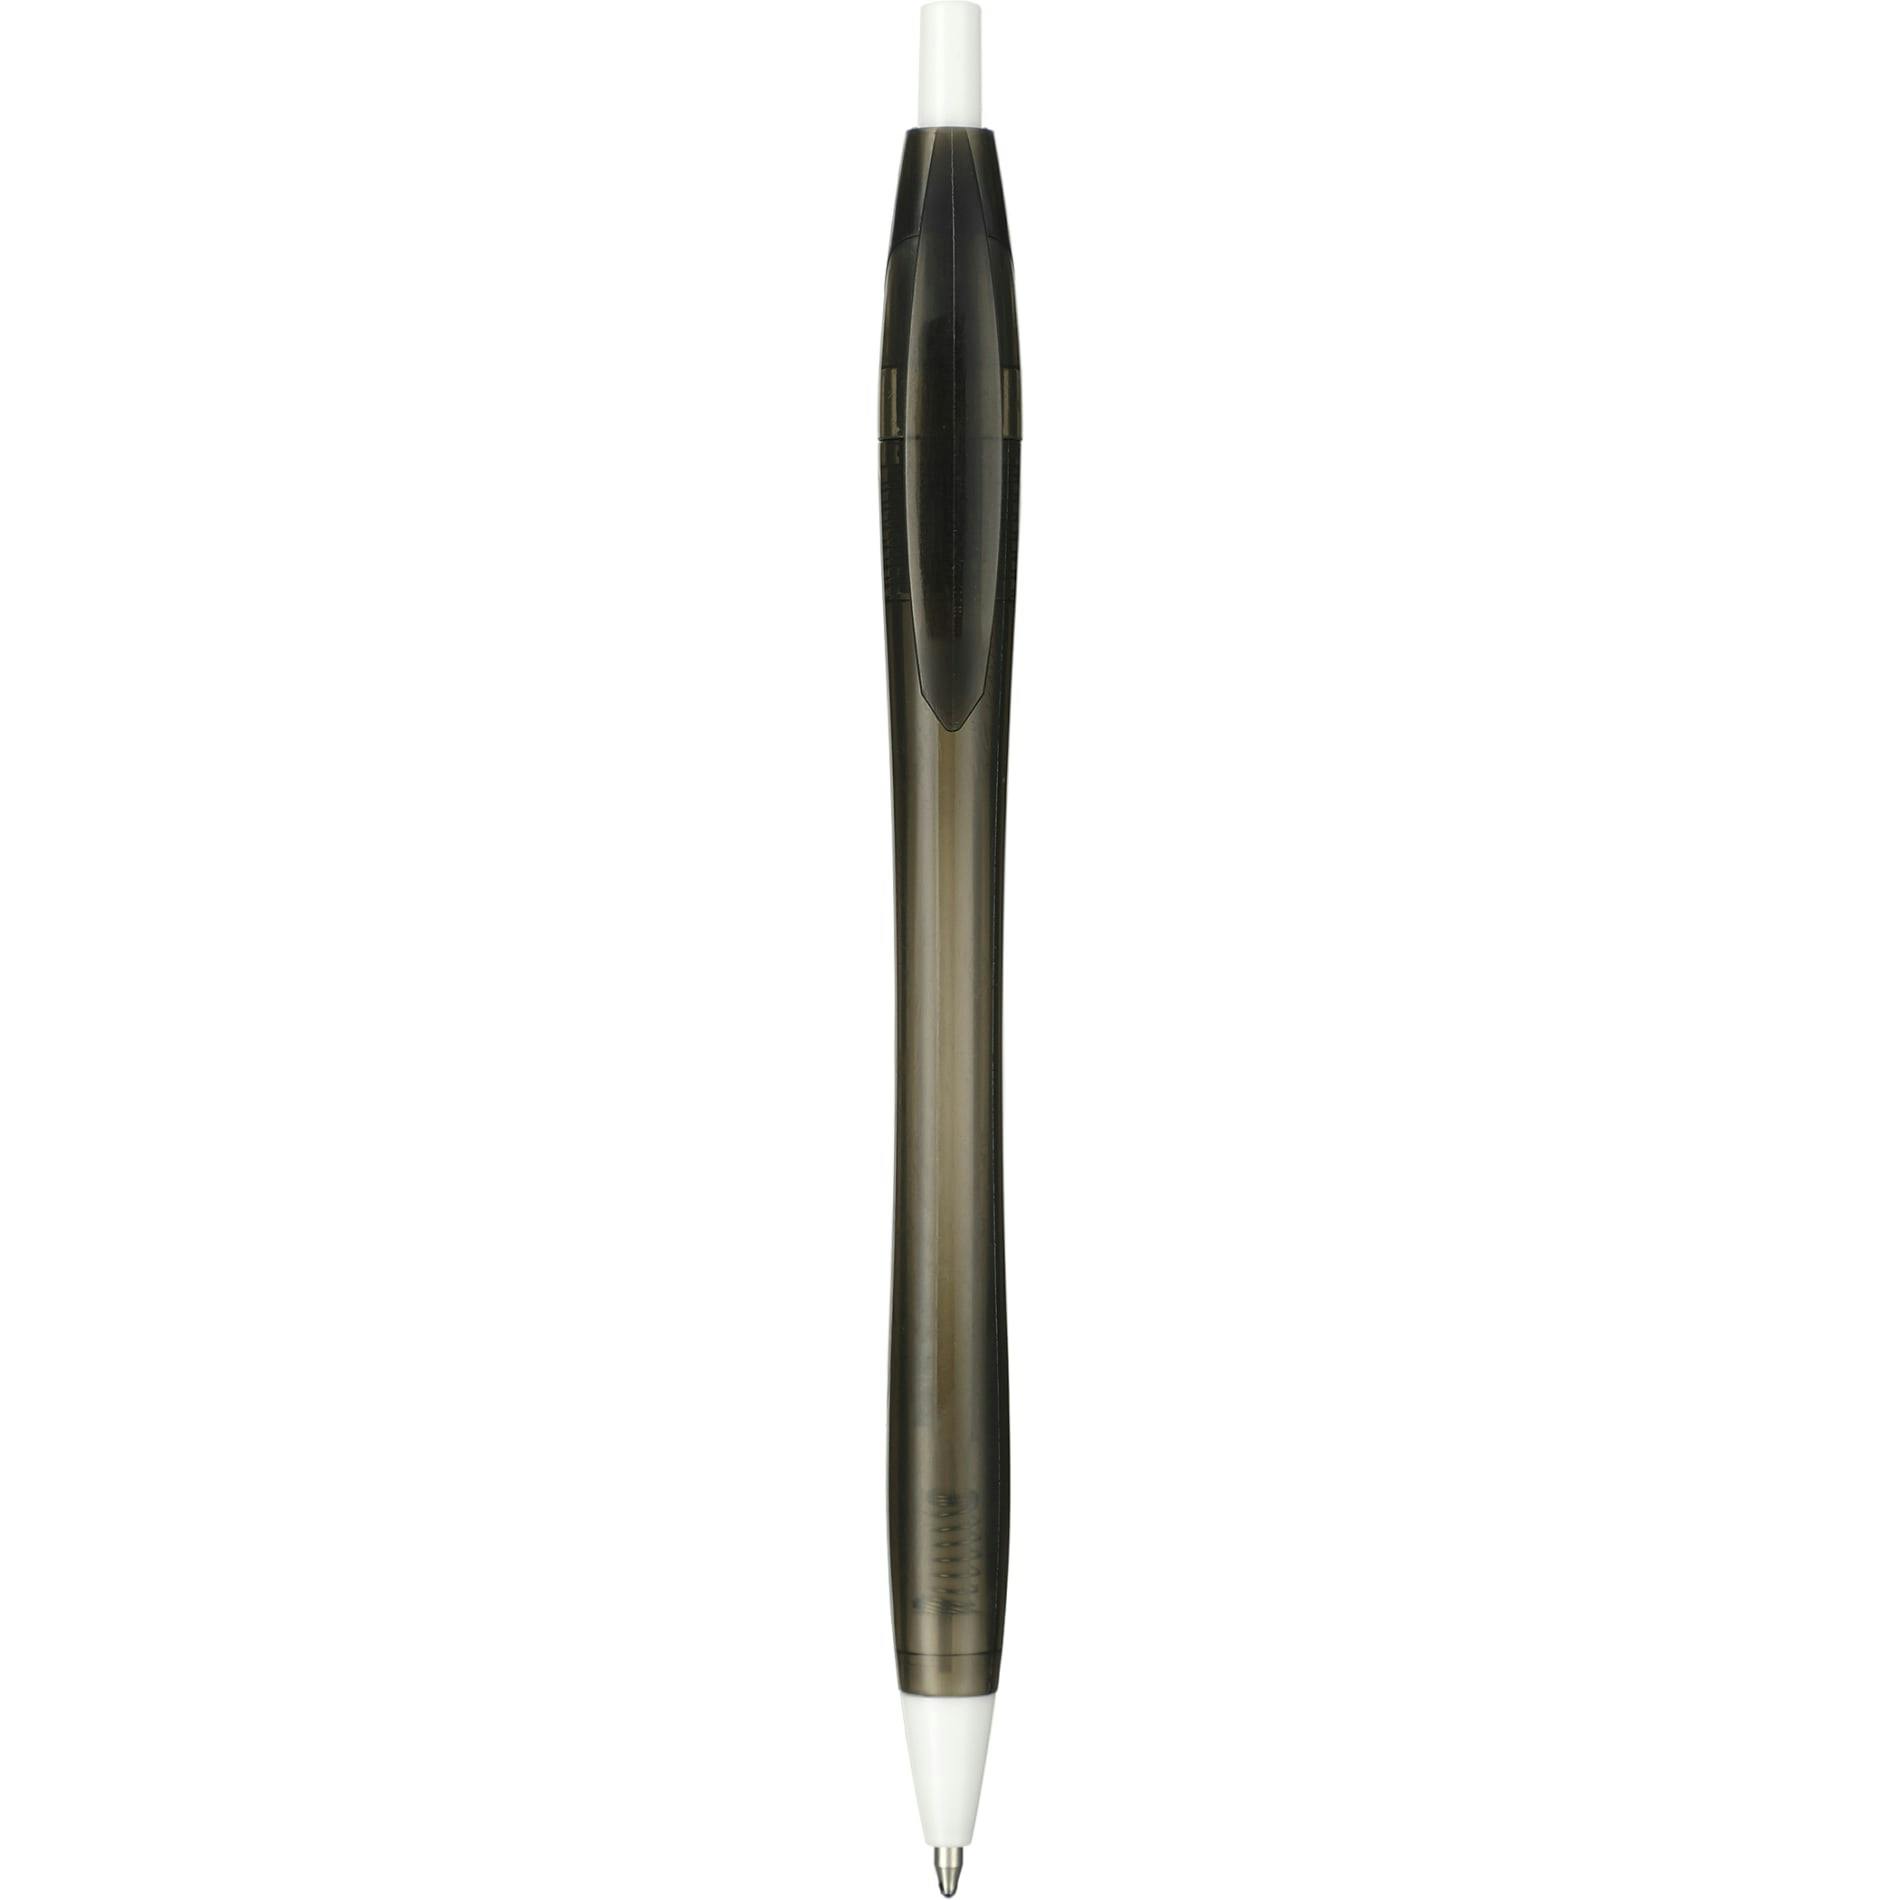 Recycled PET Cougar Ballpoint Pen - additional Image 1